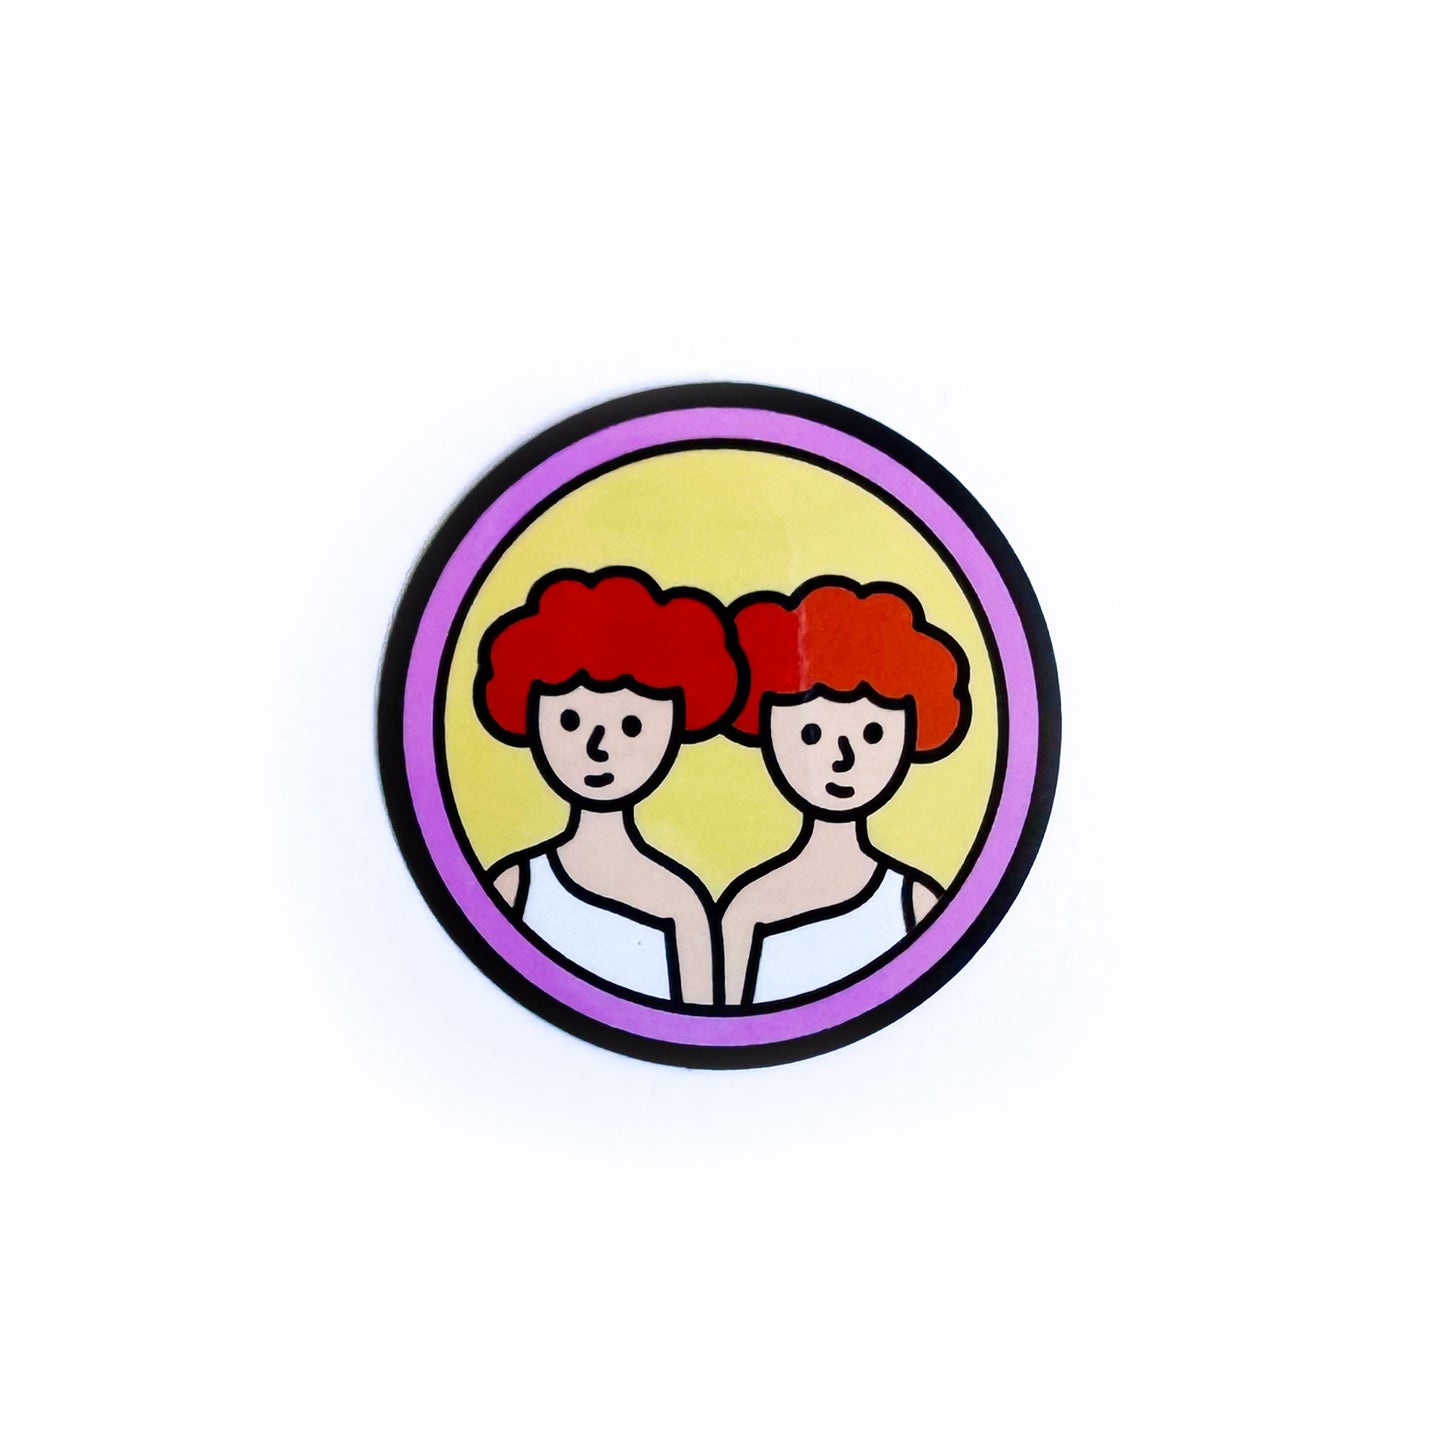 A circular sticker with twins with red hair on it to represent the Gemini Zodiac sign. 